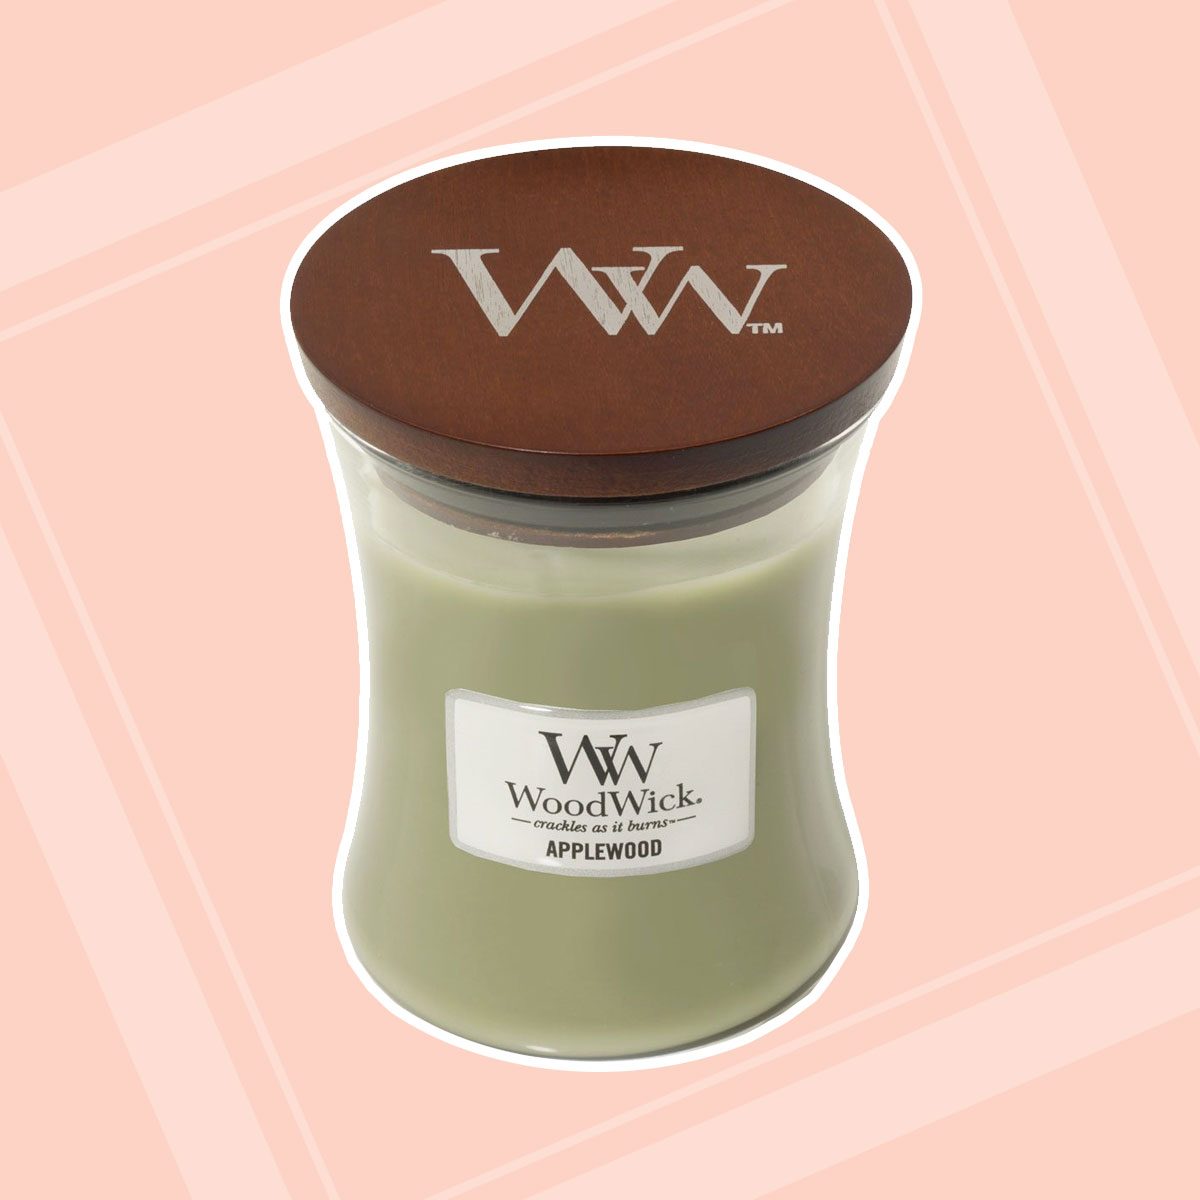 https://www.tasteofhome.com/wp-content/uploads/2020/11/WoodWick-Candle.jpg?fit=700%2C700